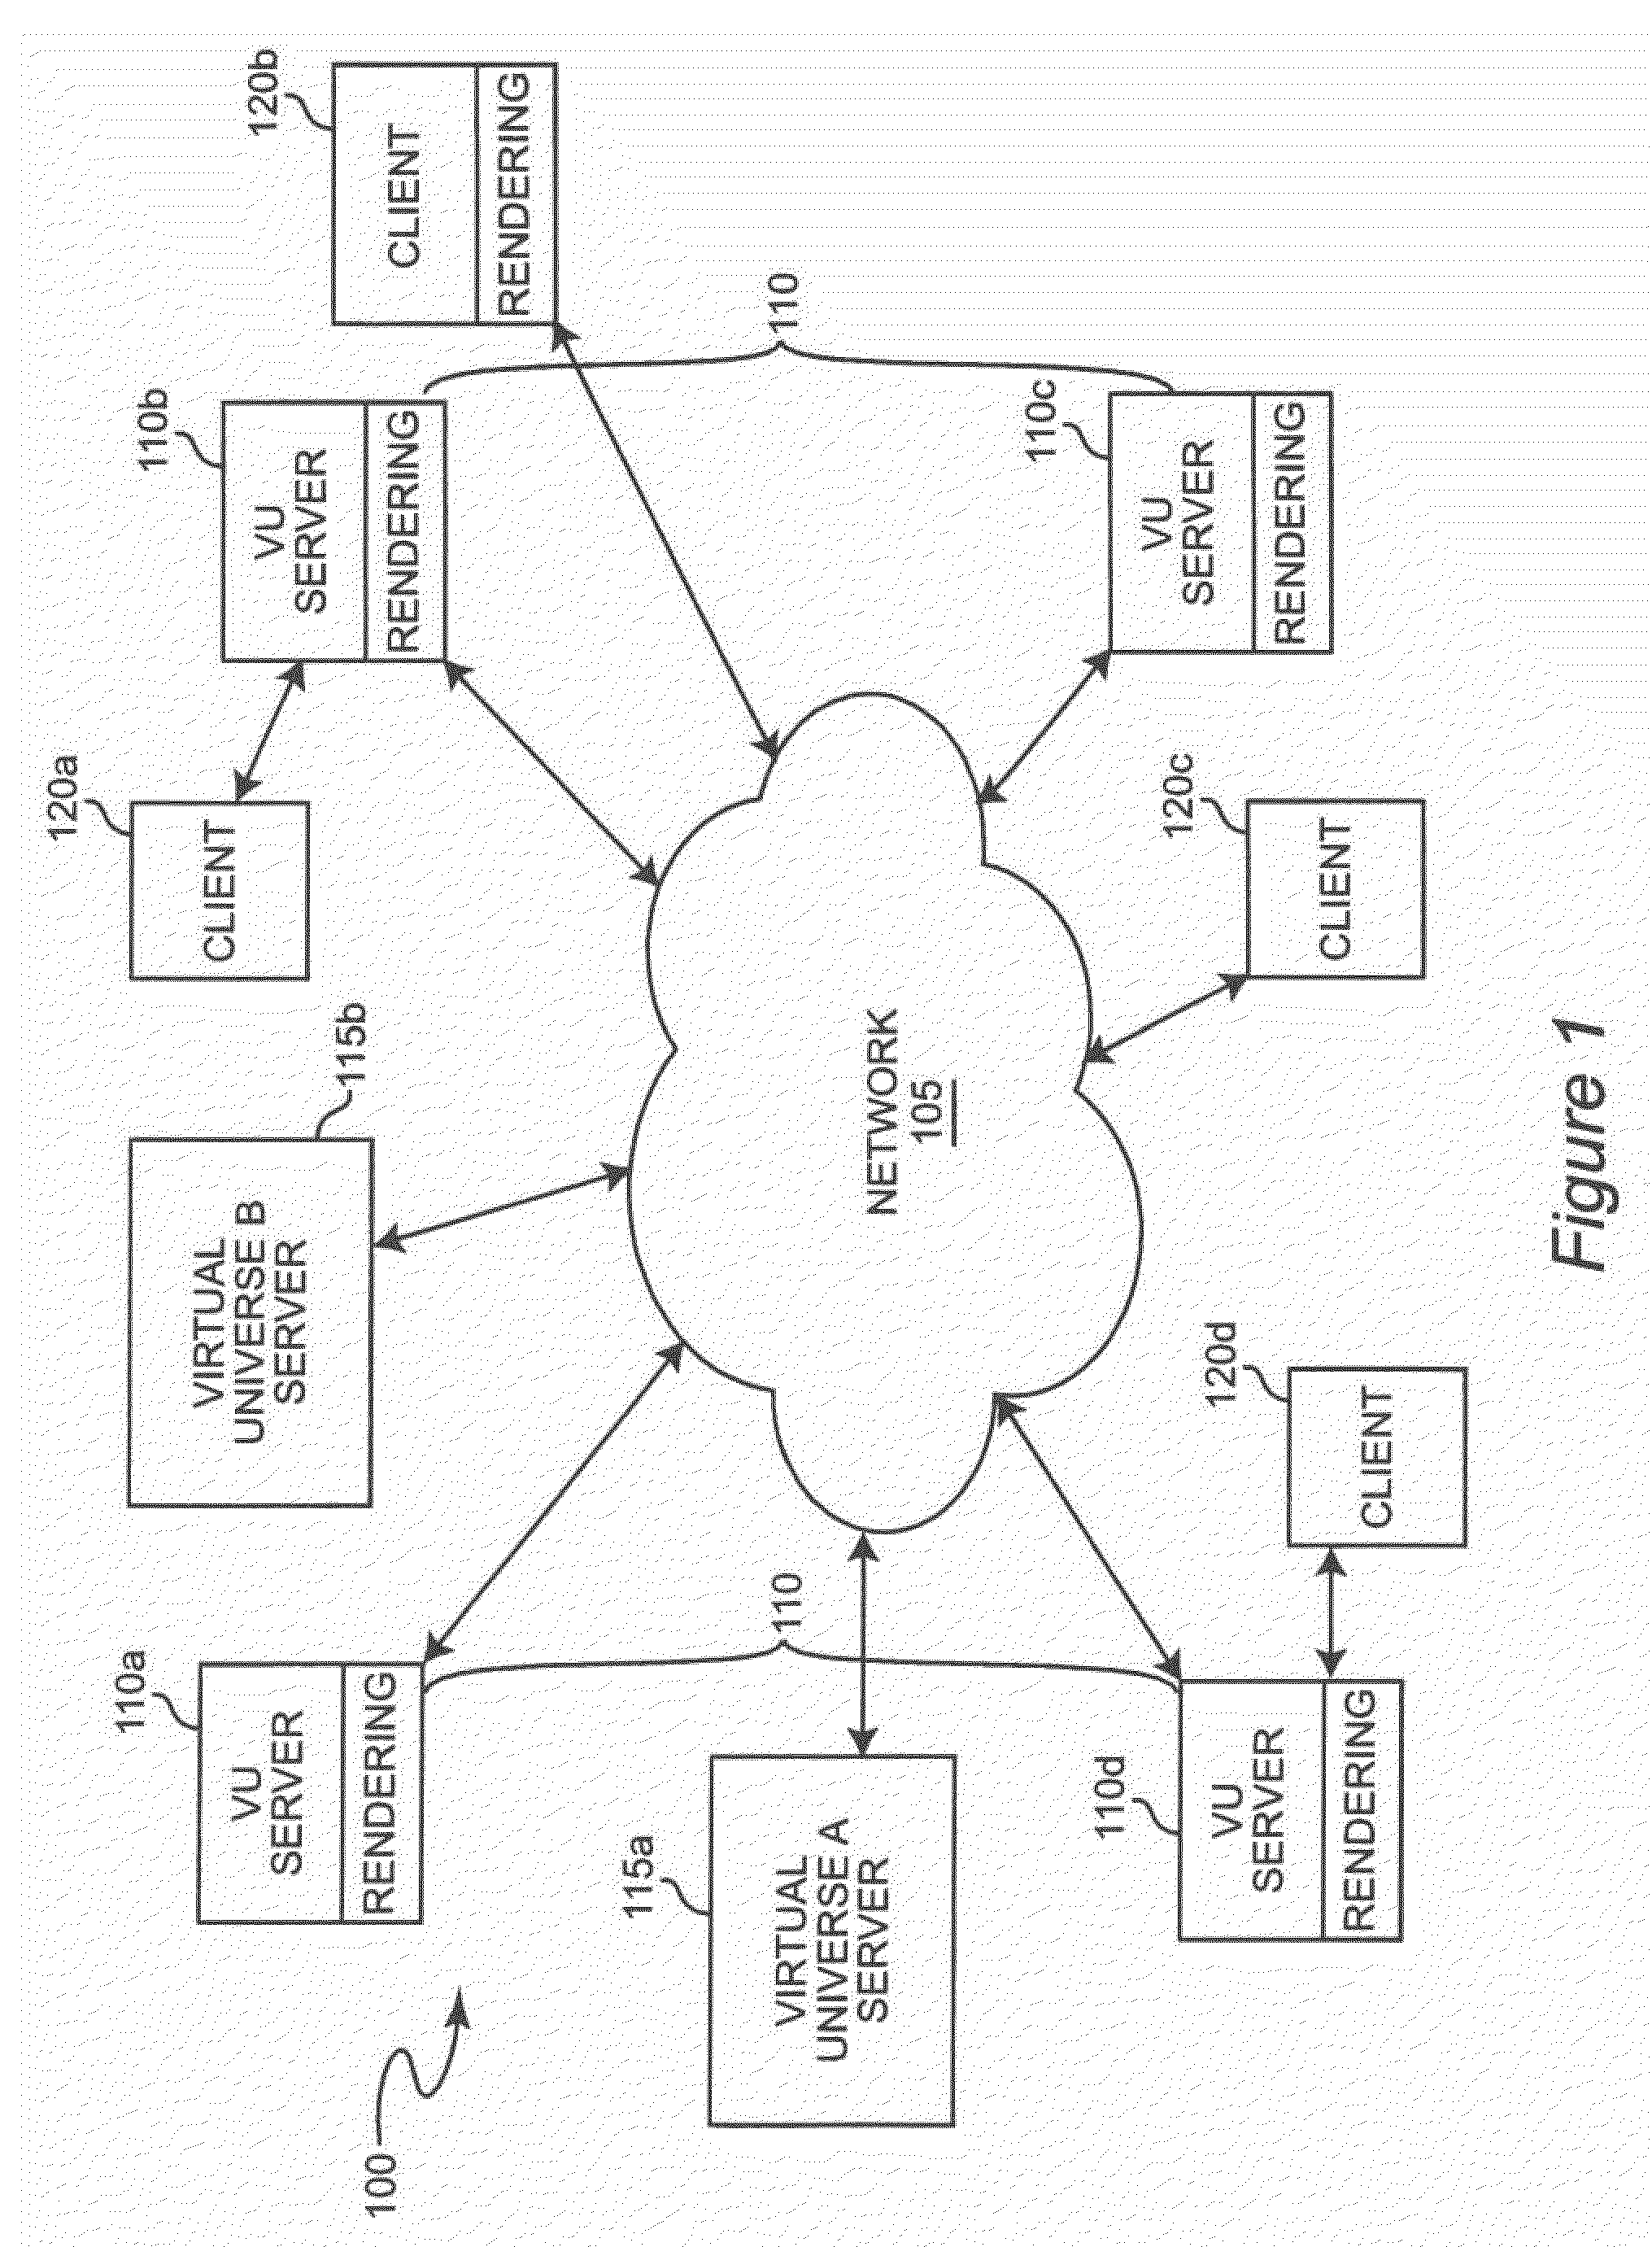 Method and System for Dynamic Detection of Affinity Between Virtual Entities